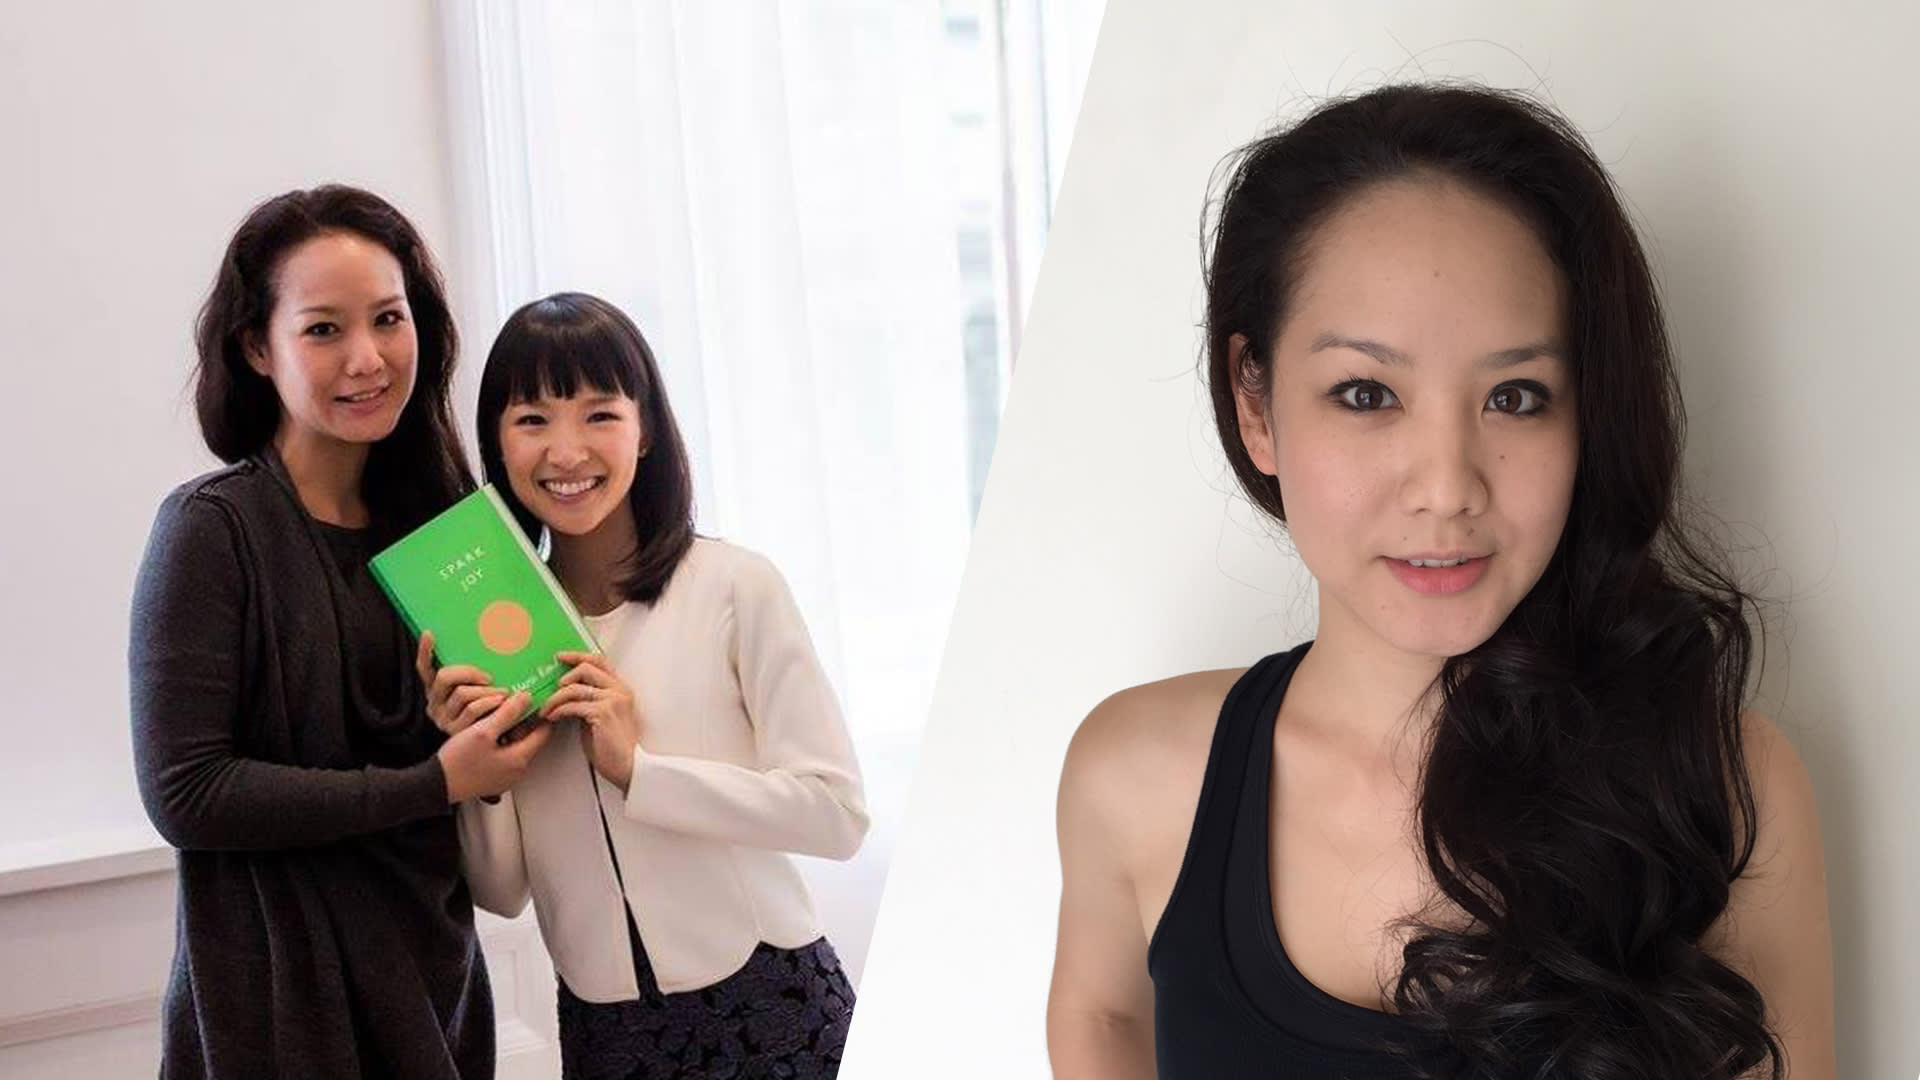 Singapore’s First KonMari Consultant-In-Training Is Former Electrico Keyboardist Amanda Ling